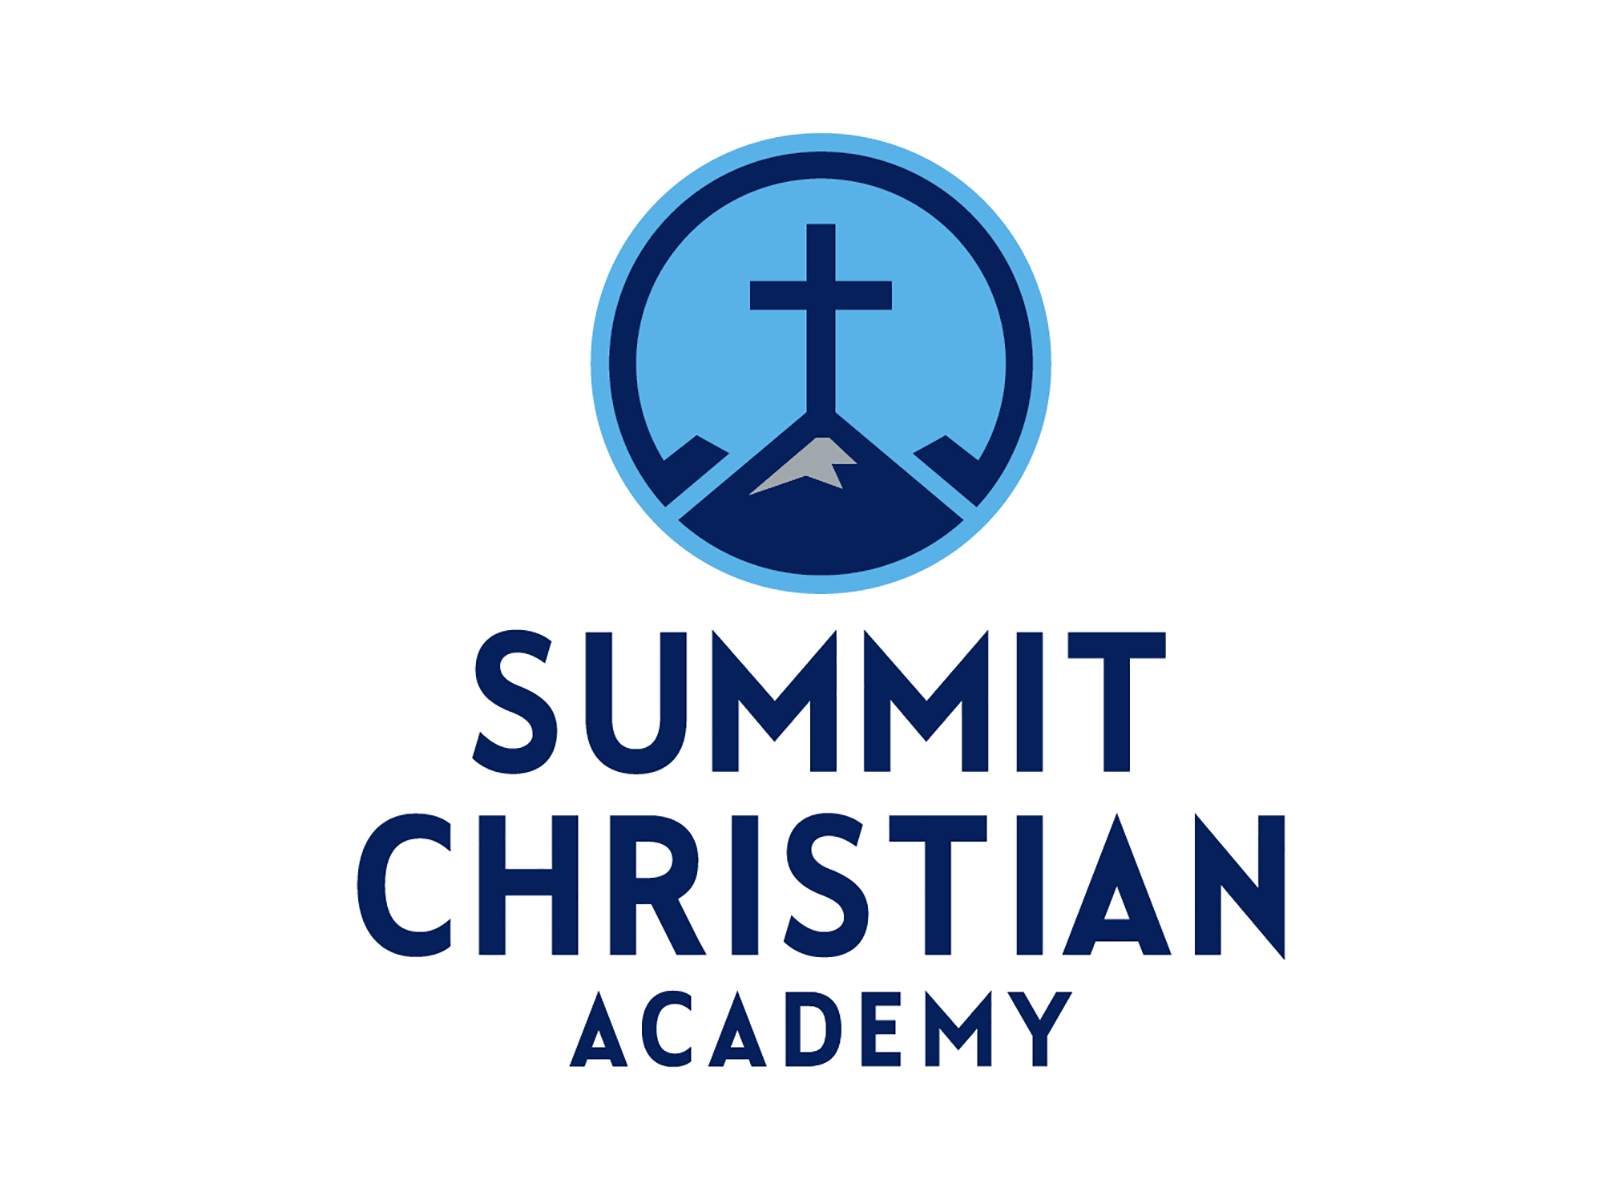 Summit Christian Academy - 1 of 3 by Josh Lee on Dribbble